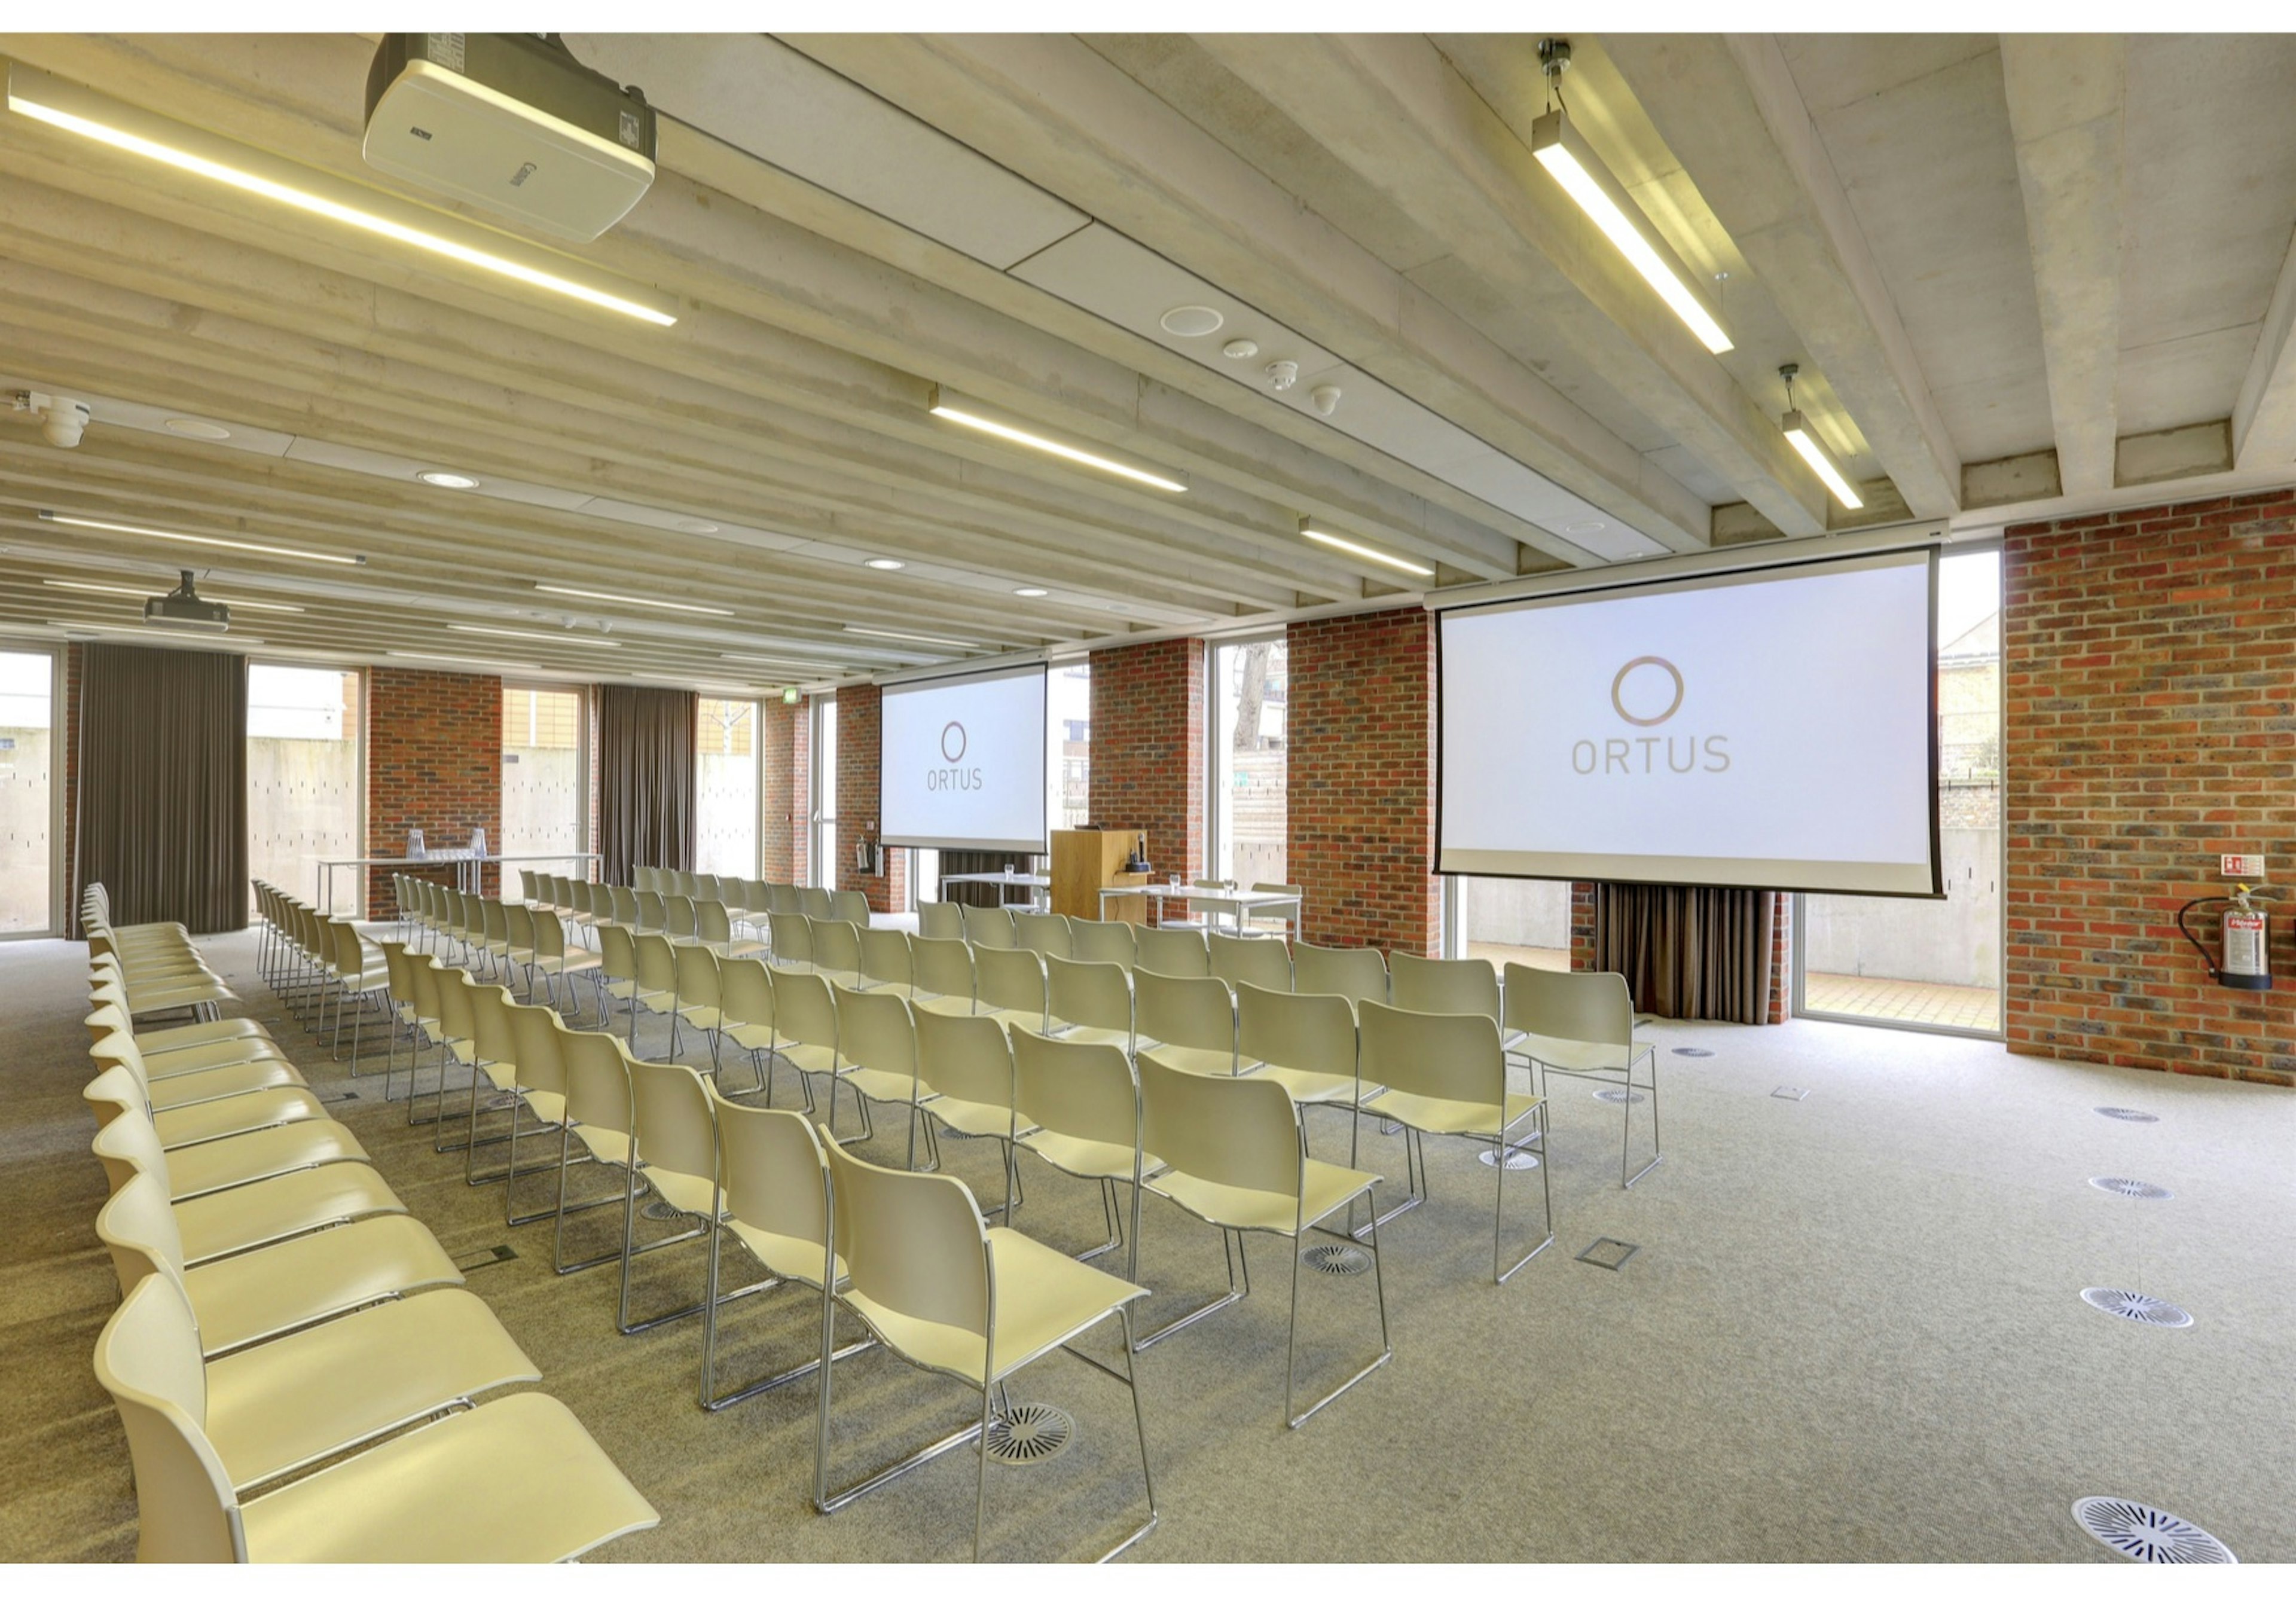 Events - ORTUS Conference and Events Venue